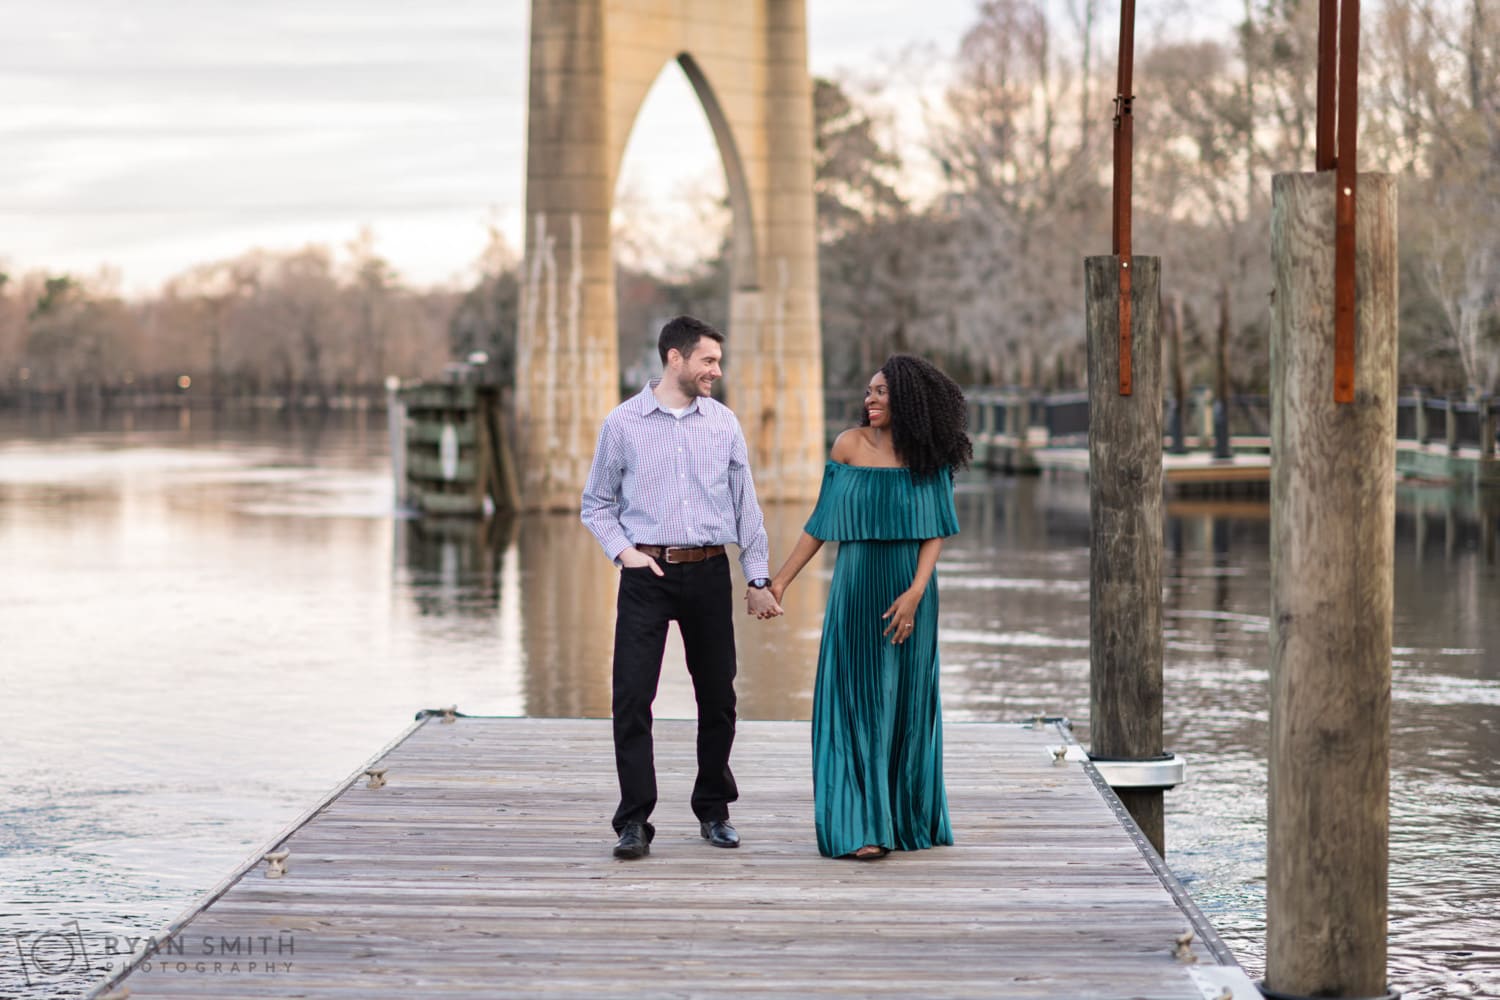 Sunset walk holding hands on the river dock - Conway Riverwalk